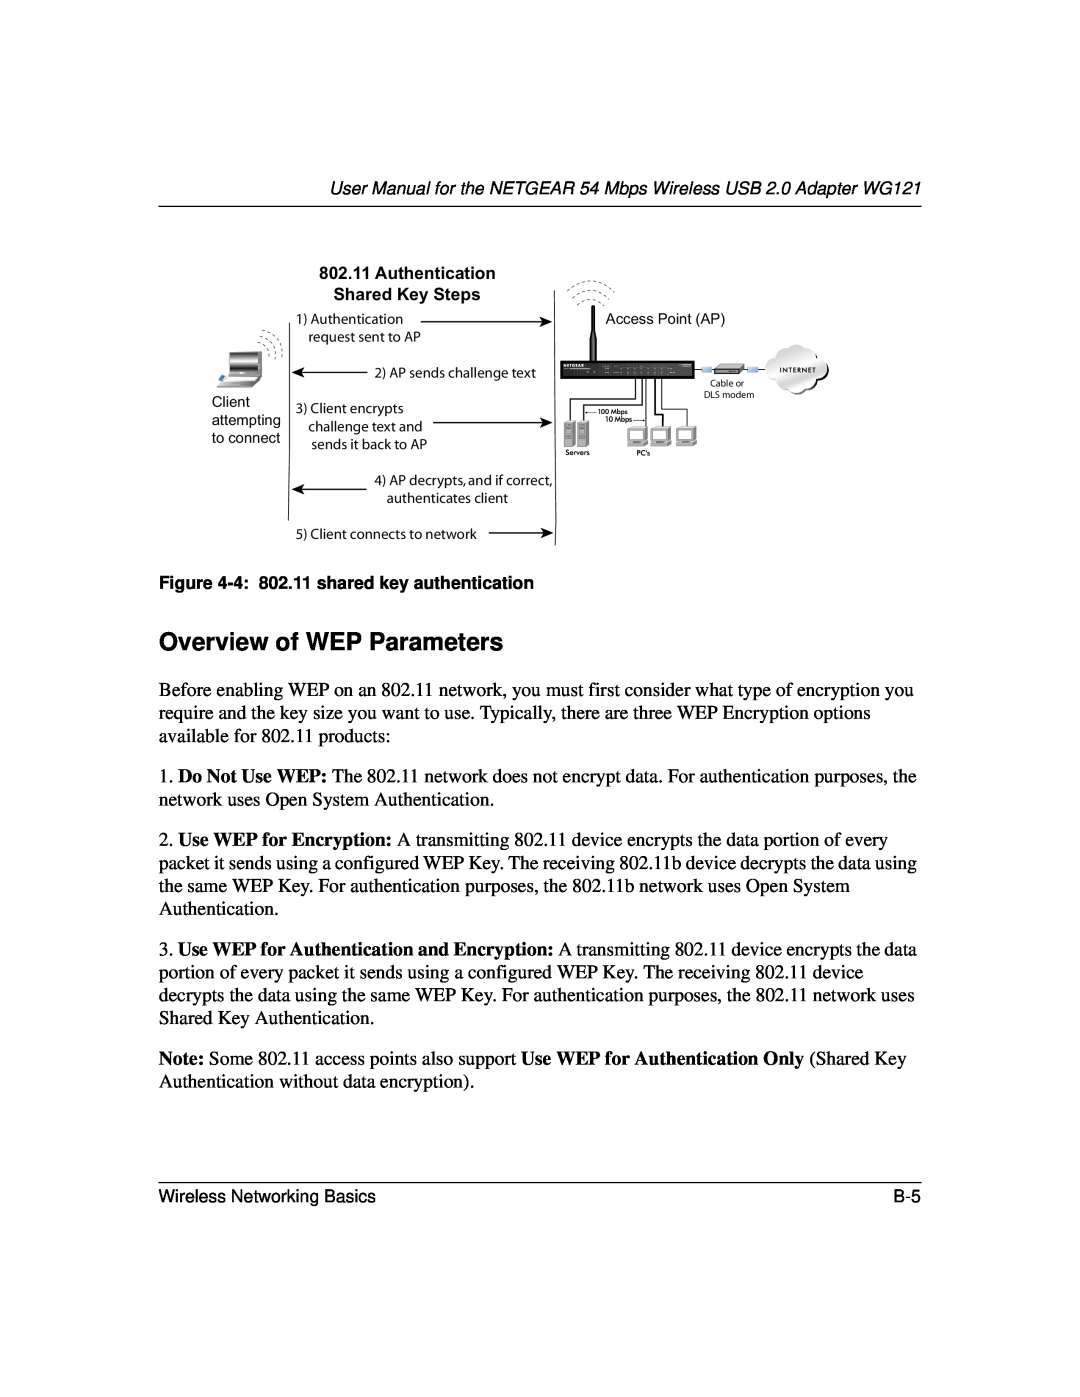 NETGEAR WG121 user manual Do Not Use WEP The, the data 